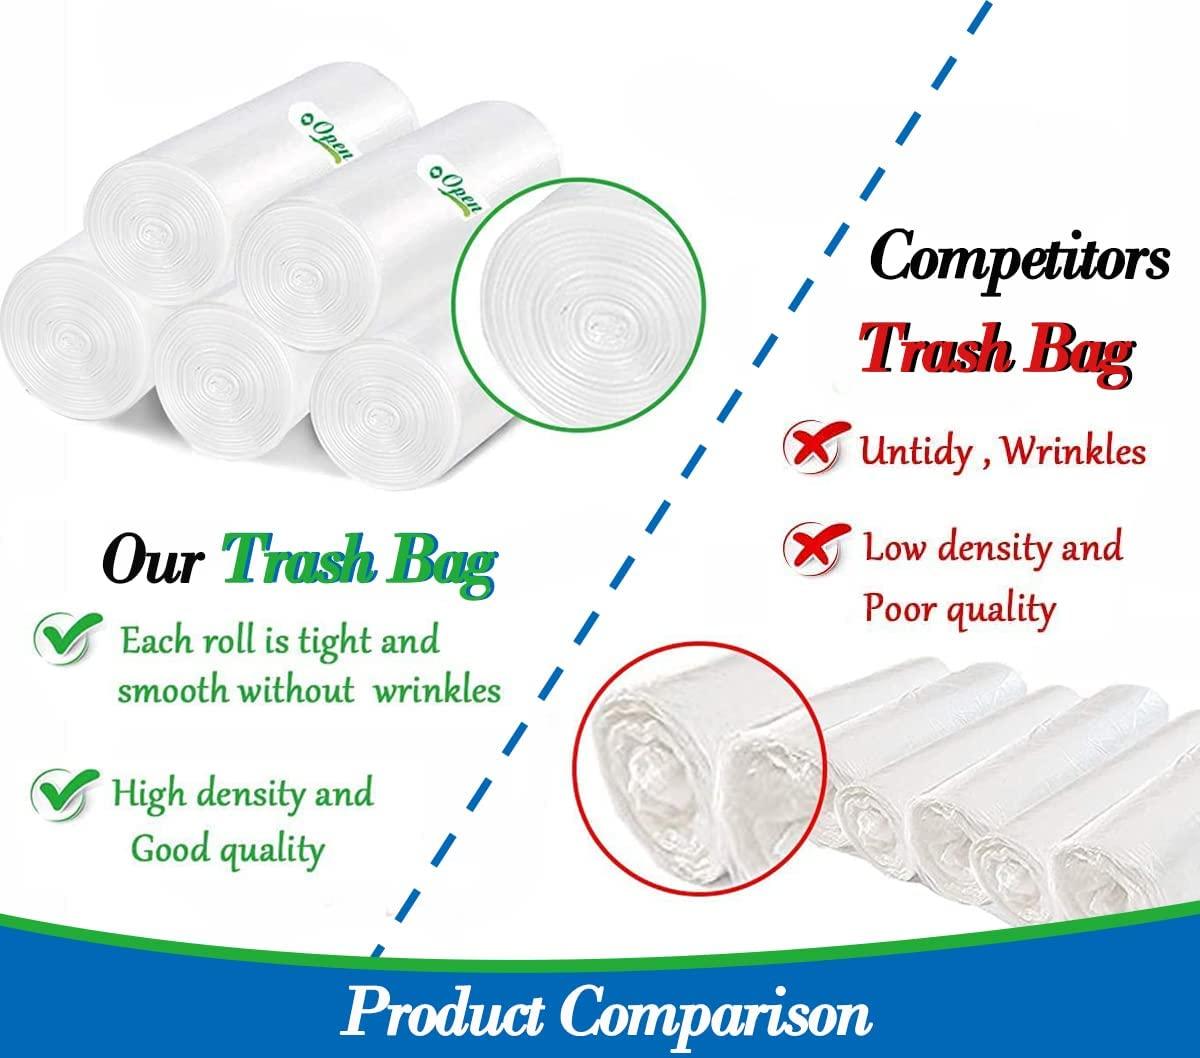 1.2 gallon trash can liners,Small clear Garbage Bags 300,Extra Strong 1 2  Gal Trash